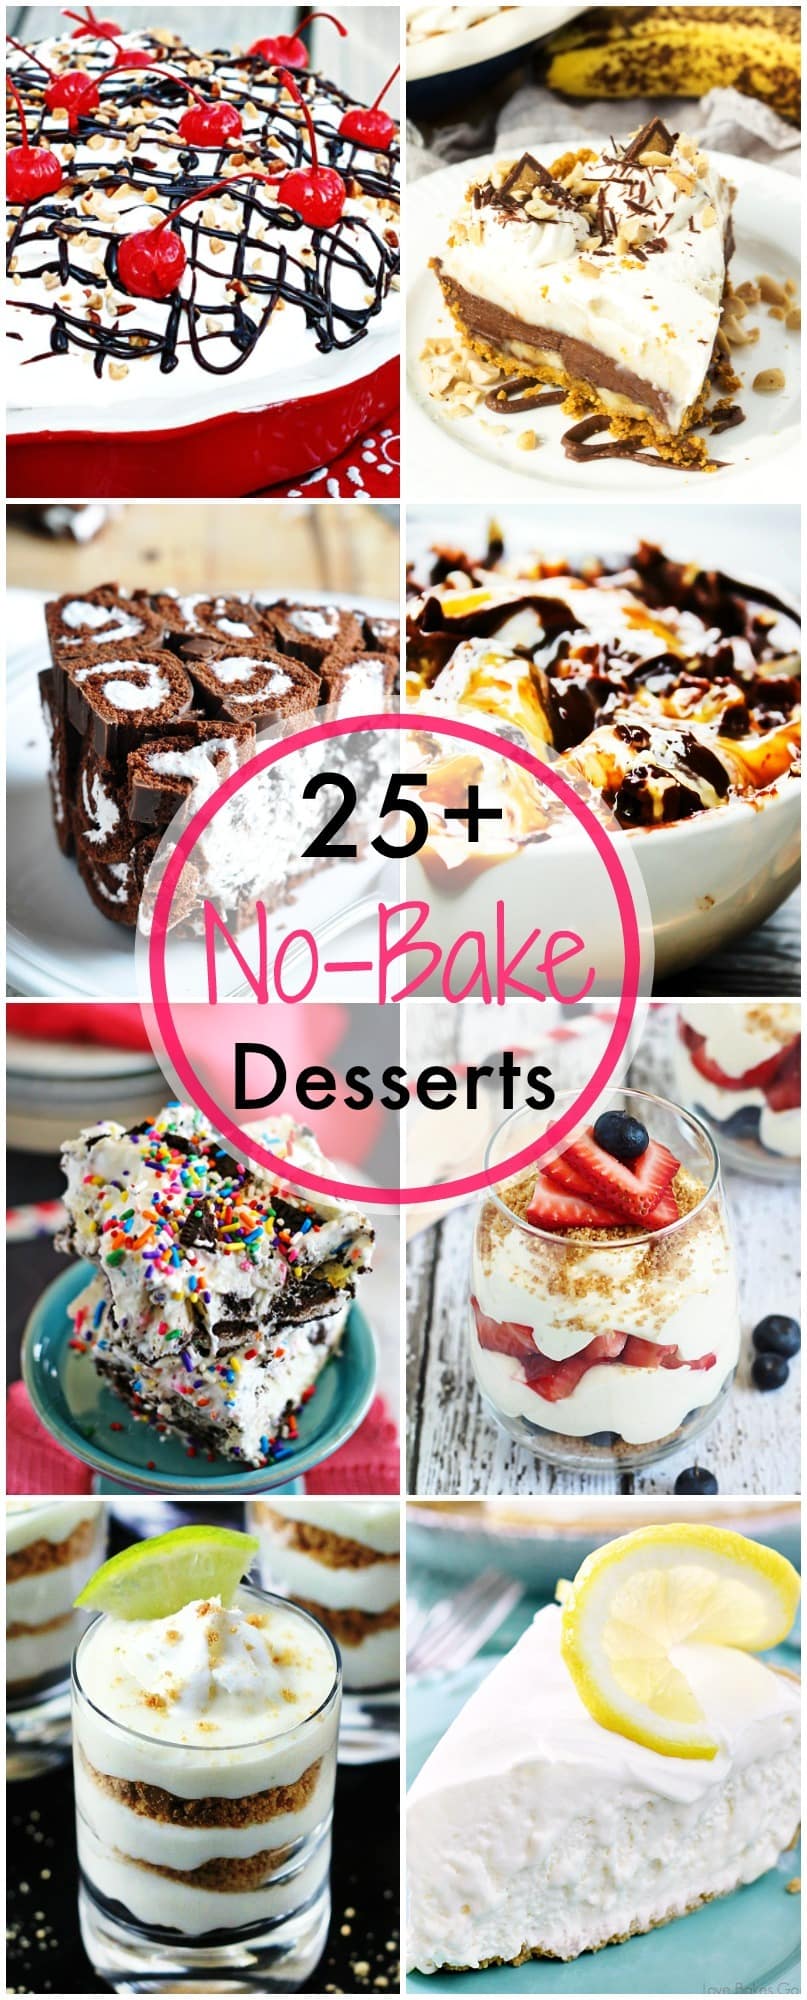 Easy No Bake Desserts Roundup of 25+ delicious desserts for you to make this summer! No need to turn on the oven when you can make easy no bake desserts!